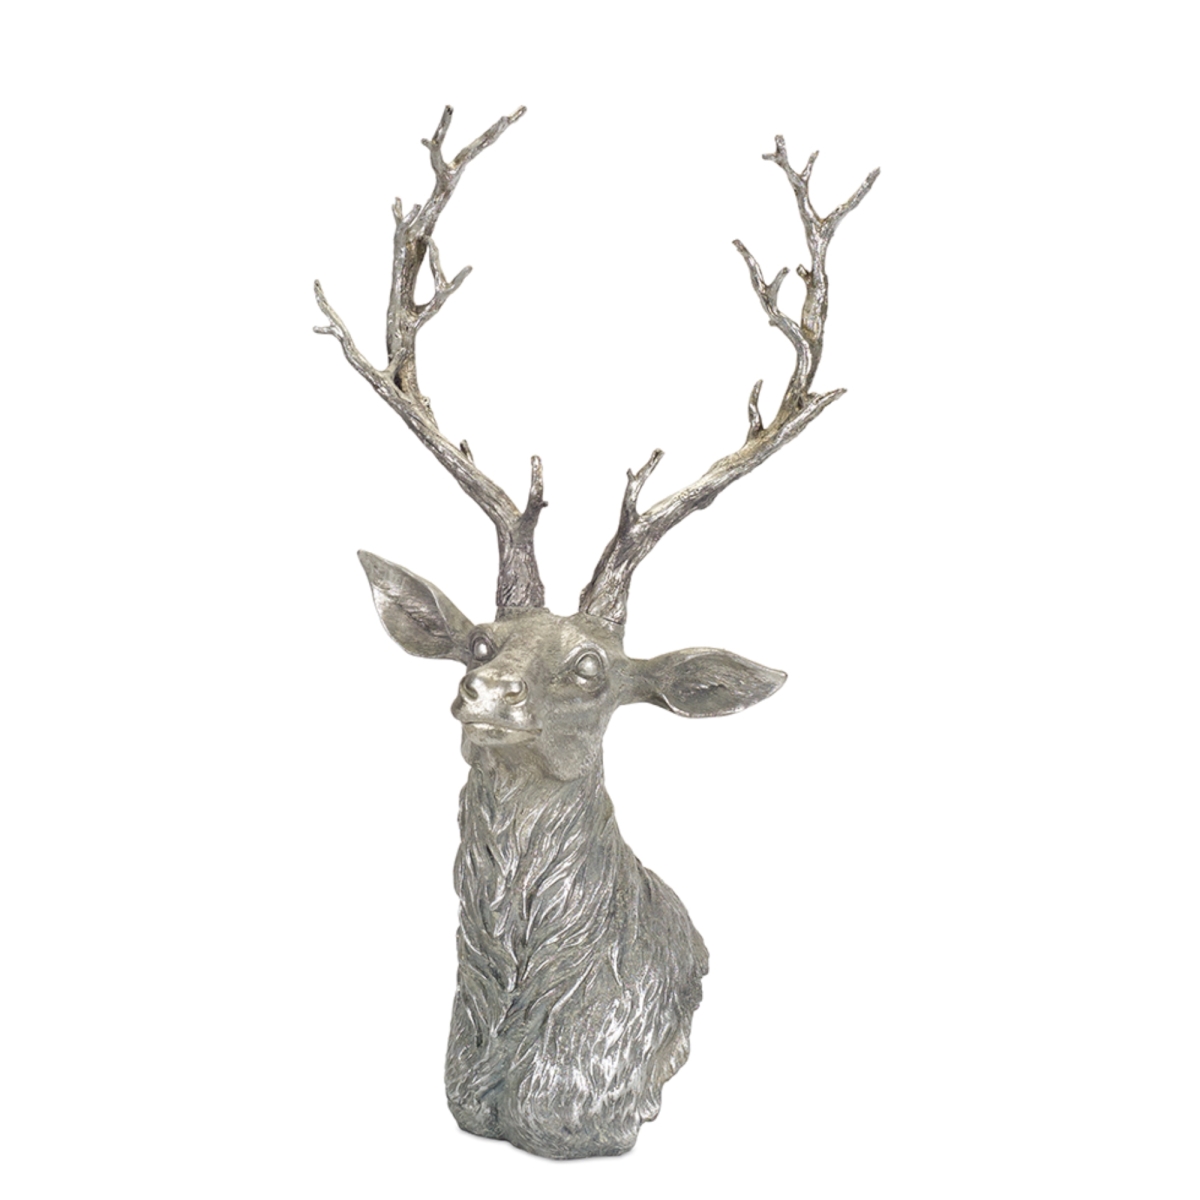 72653ds 29.5 X 11.5 X 14.5 In. Deer Bust Poly Stone - Silver